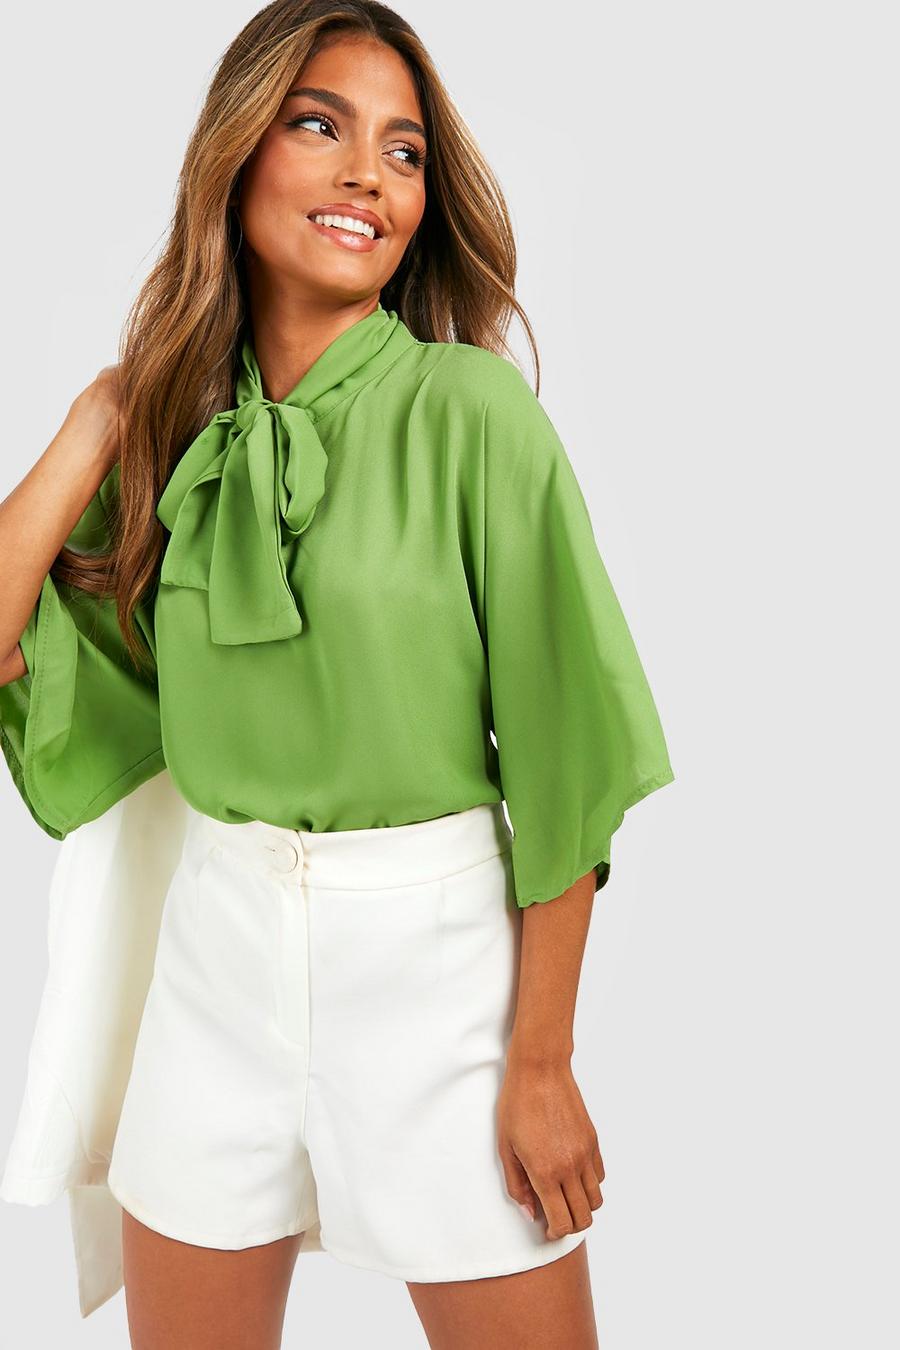 Soft lime yellow Woven Tie Neck Floaty Flared Sleeve Blouse